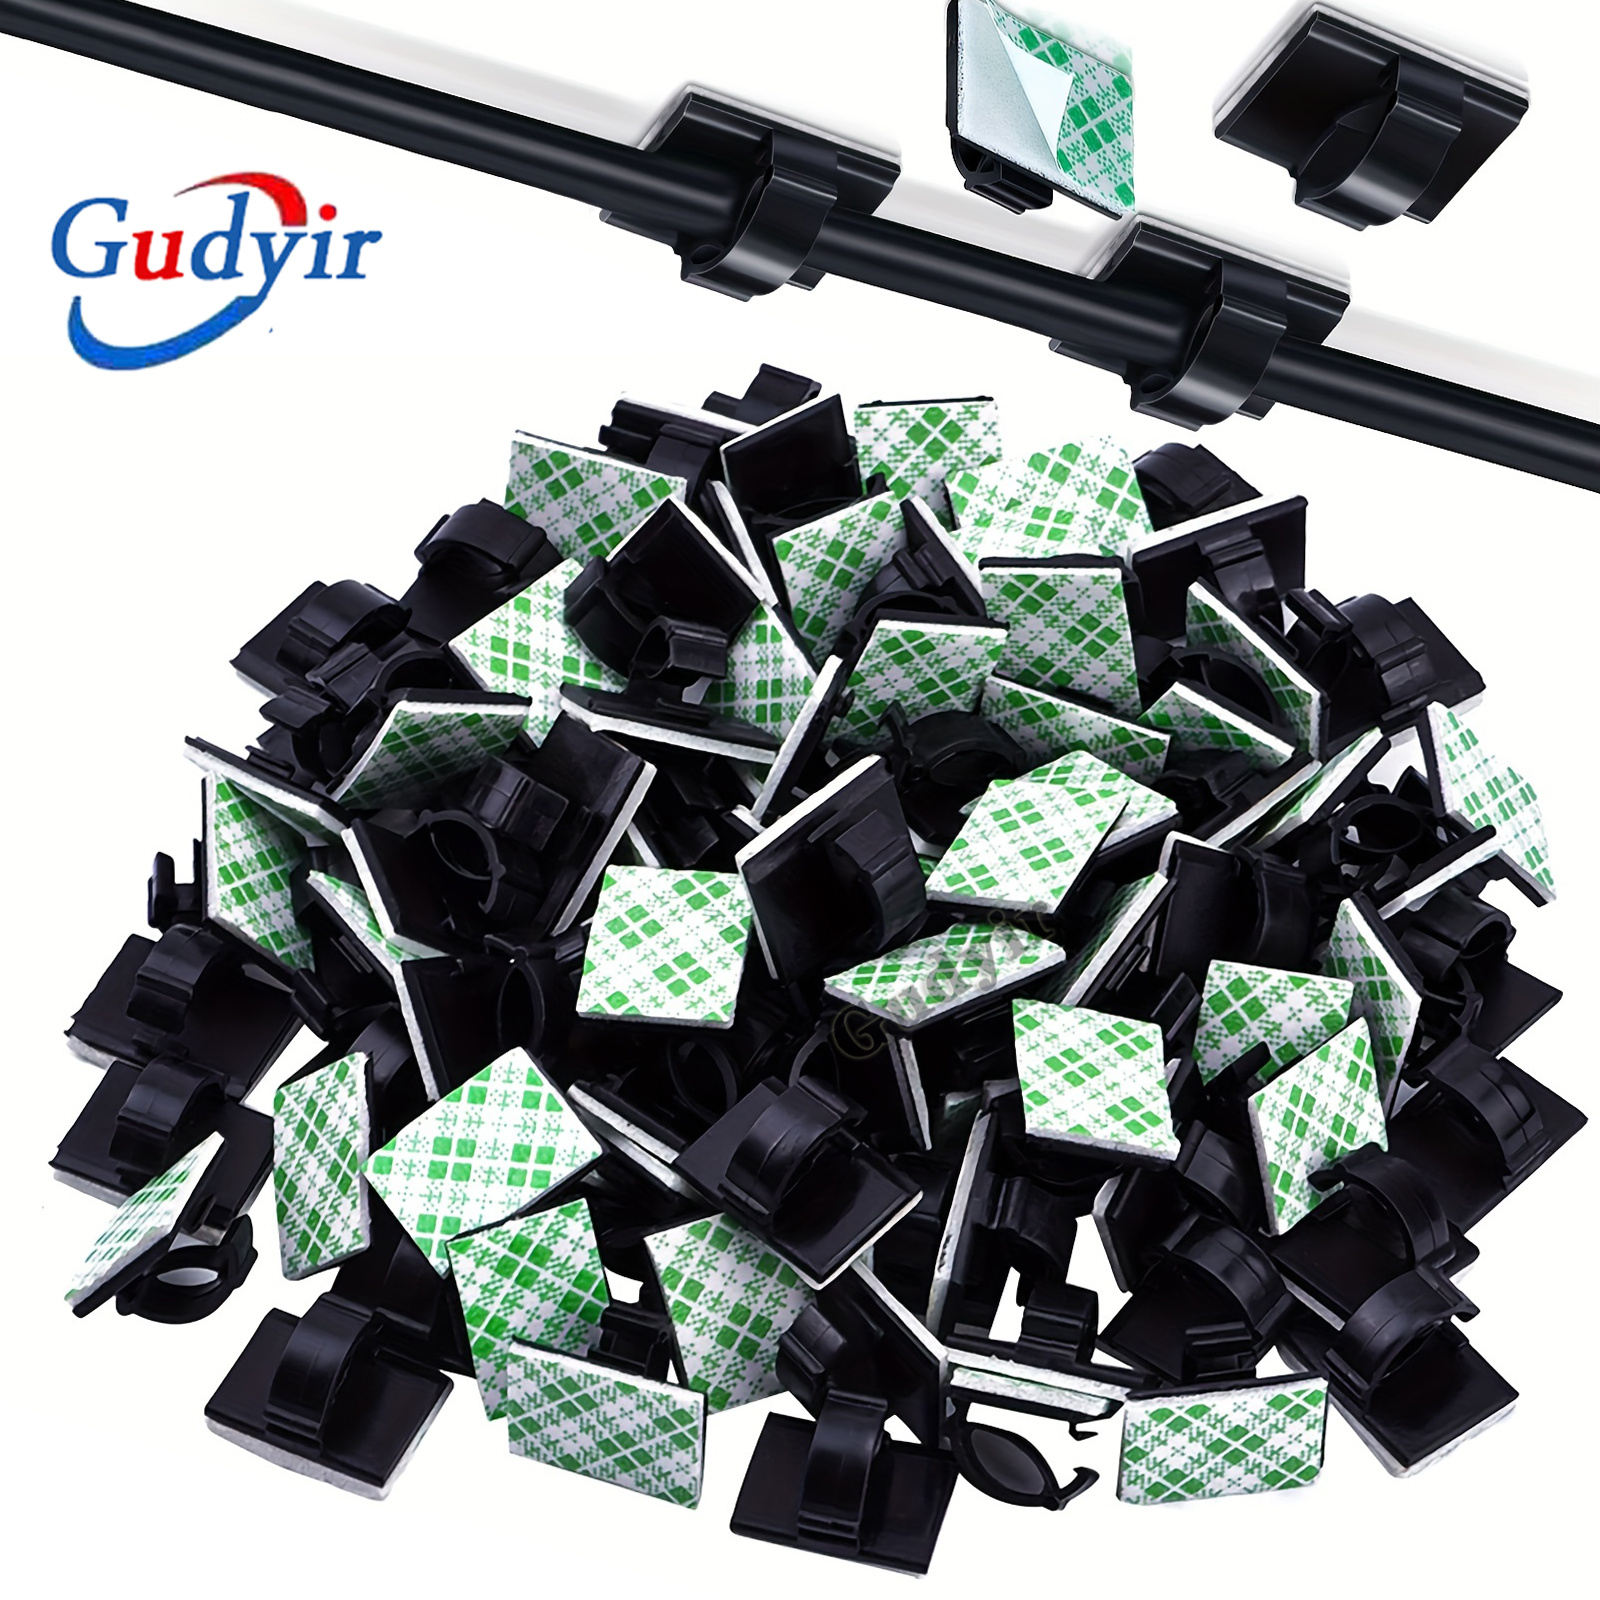  50pcs Adhesive Wire Clips,Car Cable Organizer,Cable